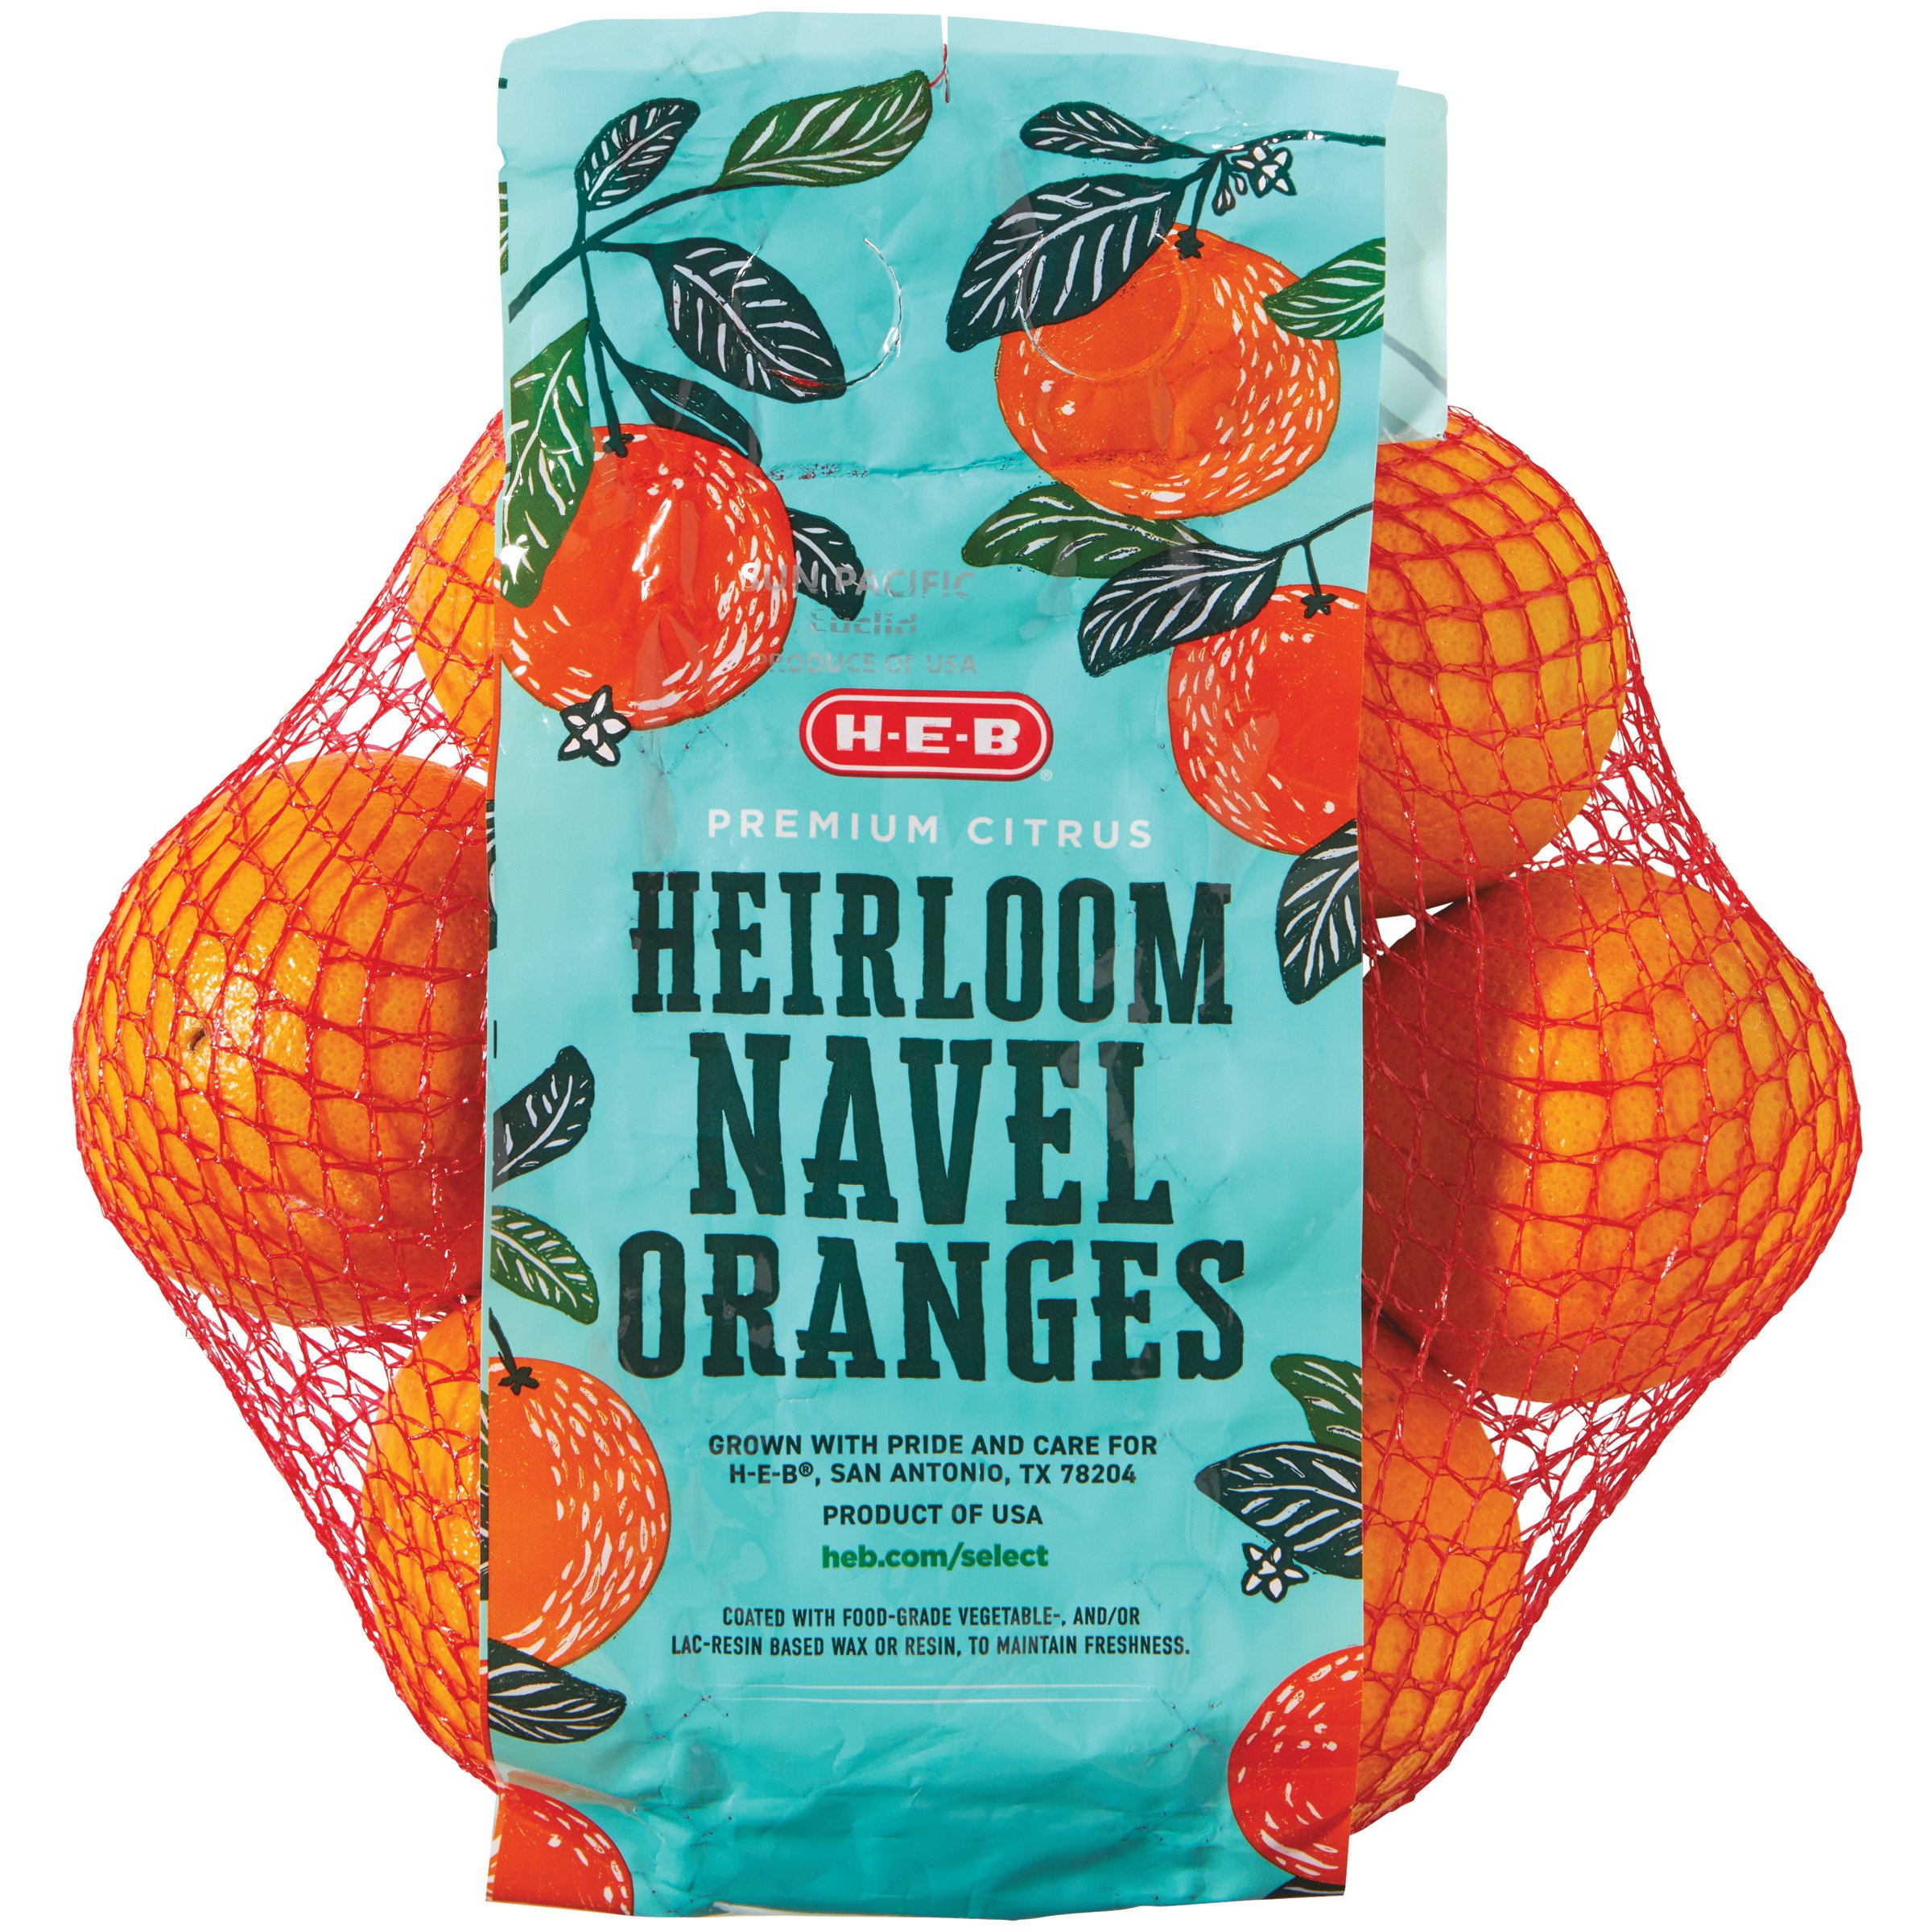 https://images.heb.com/is/image/HEBGrocery/002529006-1